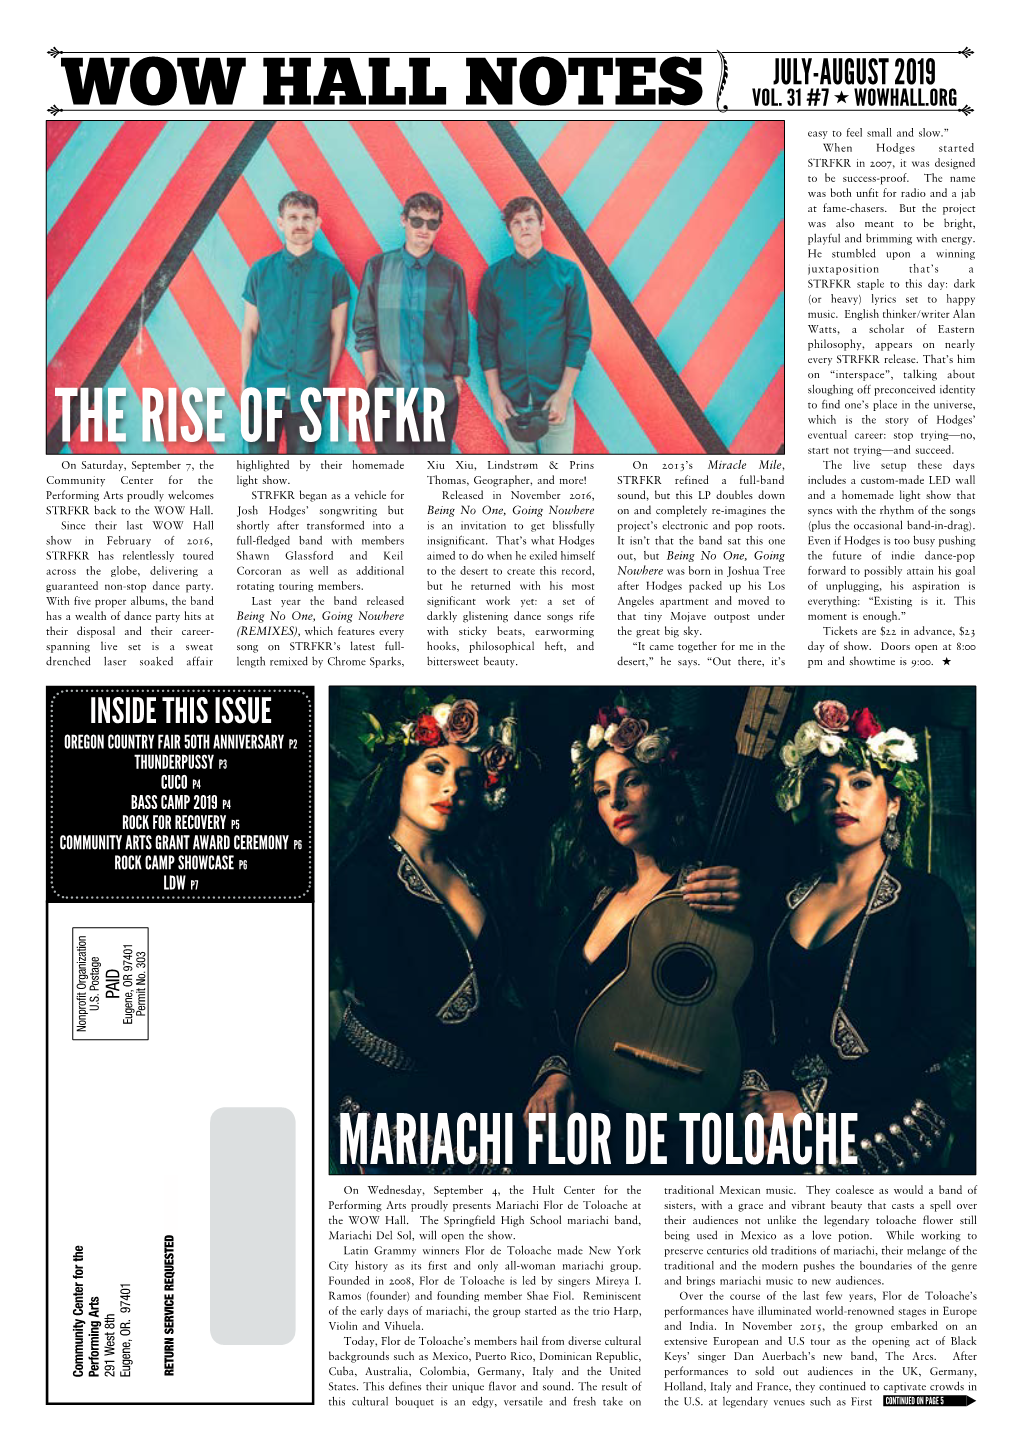 THE RISE of STRFKR Start Not Trying—And Succeed